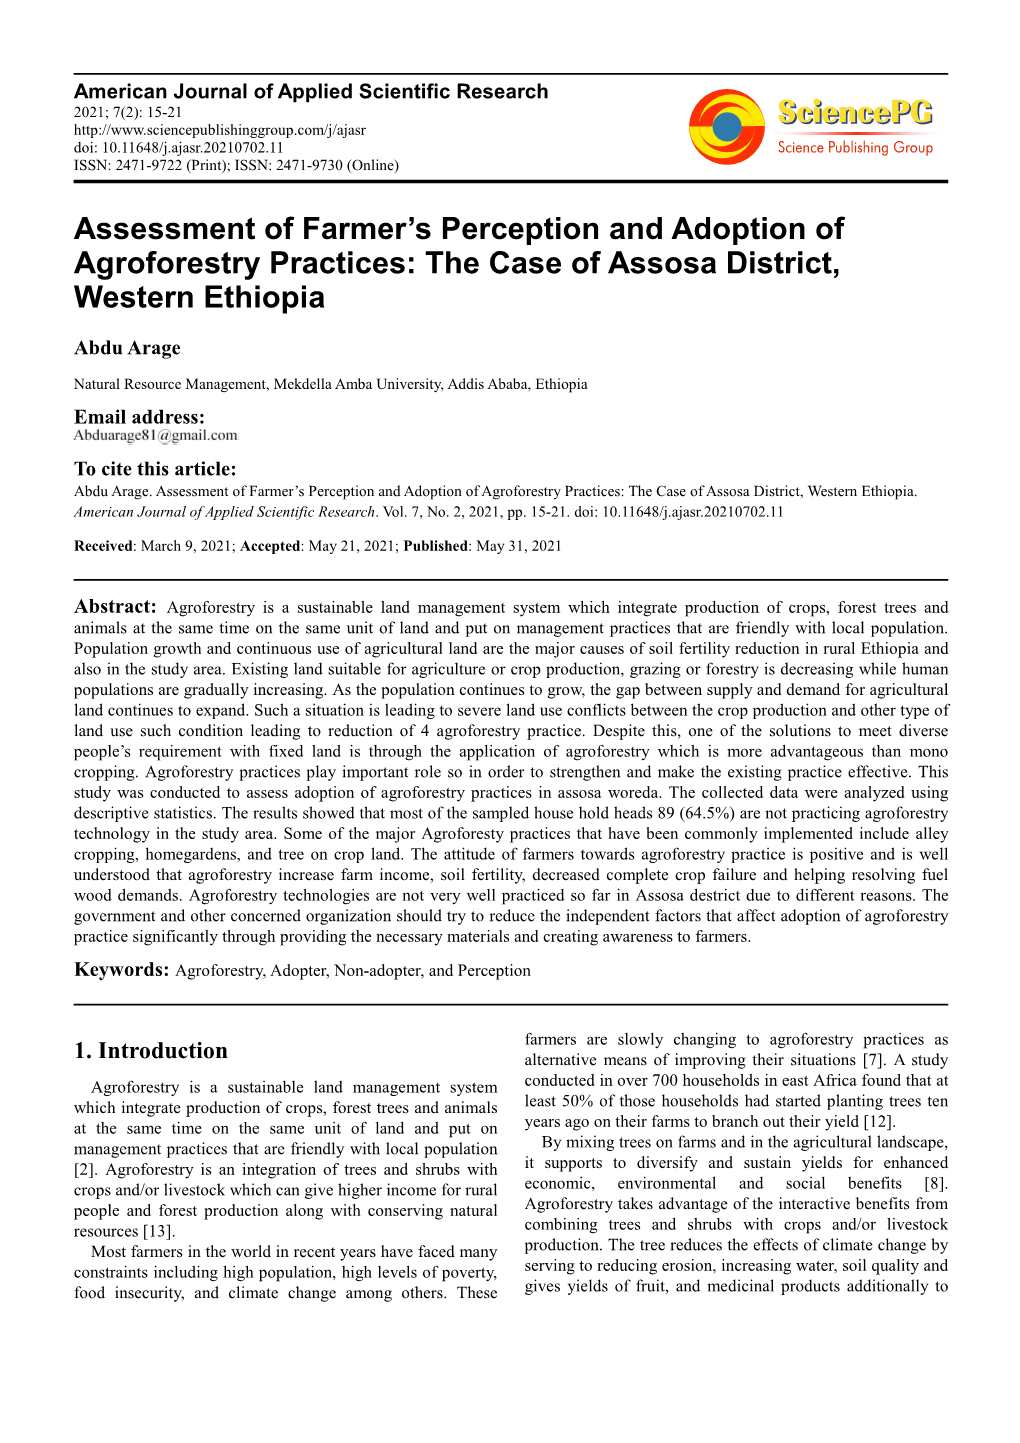 Assessment of Farmer's Perception and Adoption of Agroforestry Practices